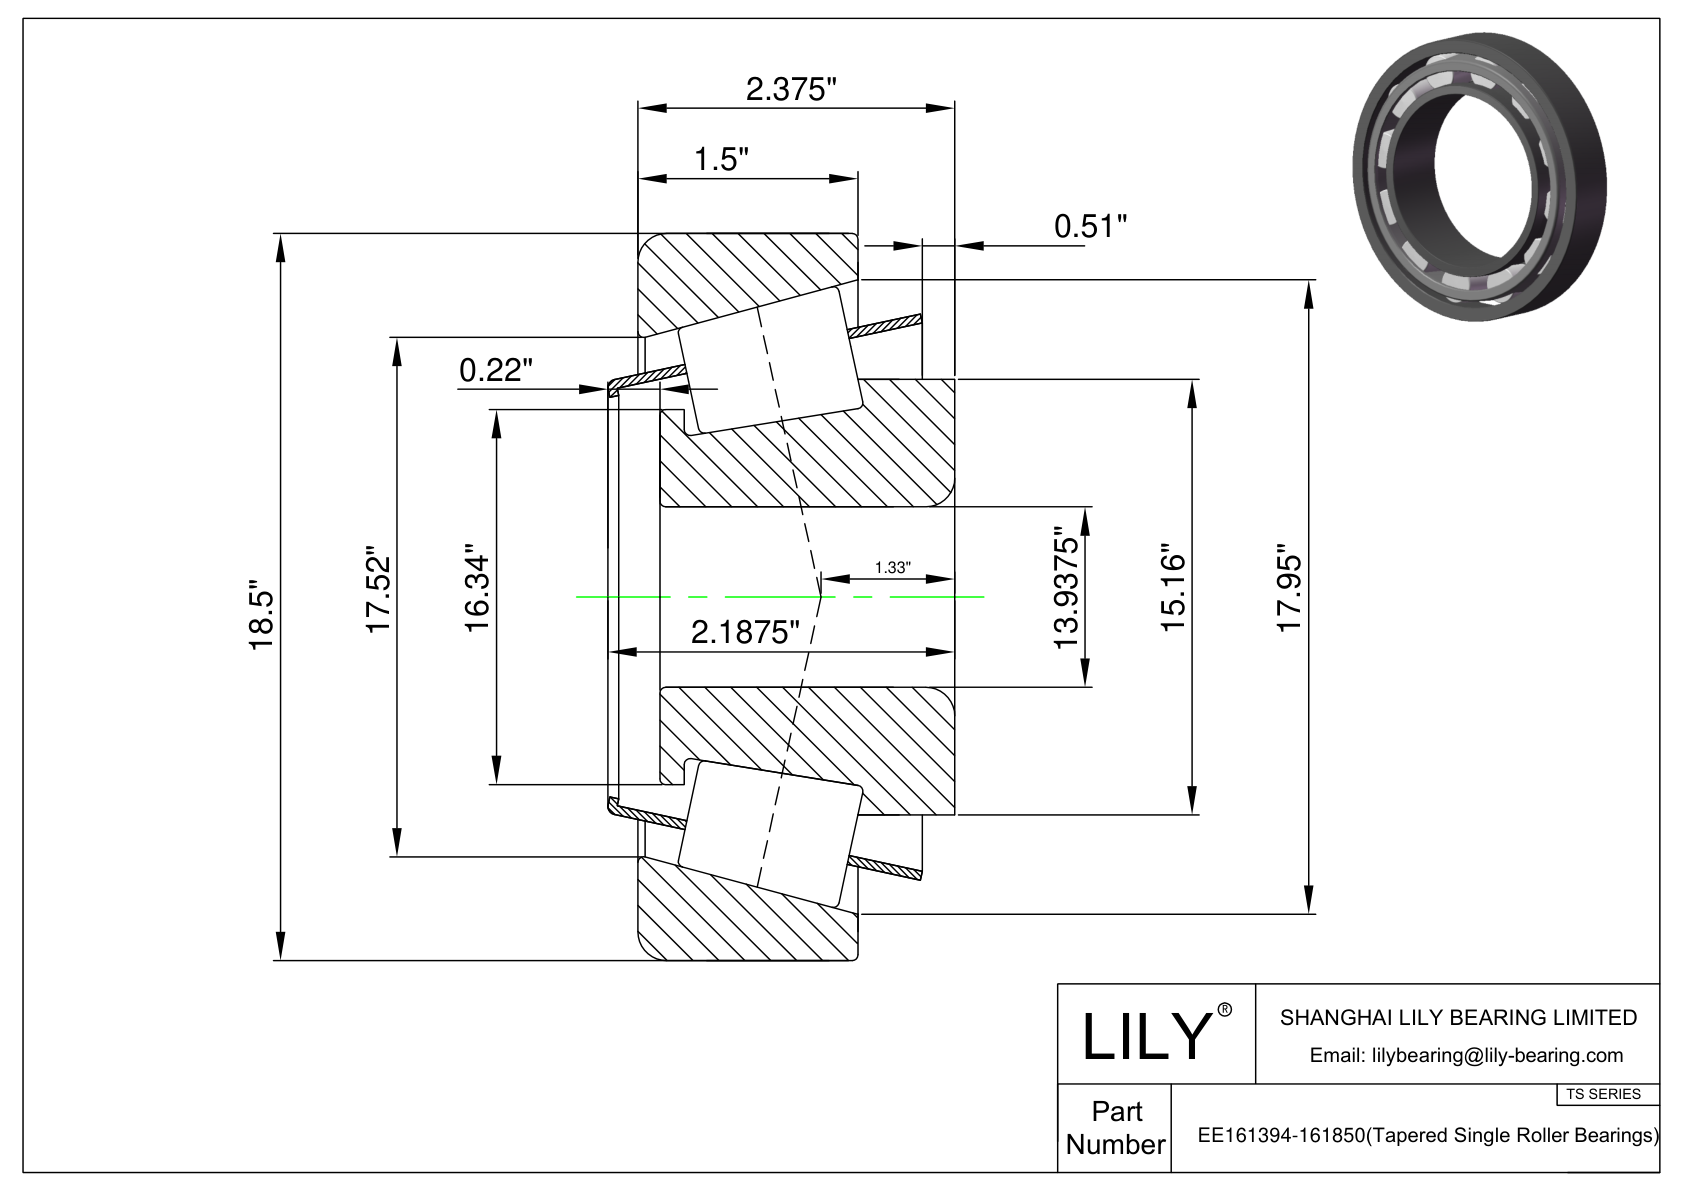 EE161394-161850 TS (Tapered Single Roller Bearings) (Imperial) cad drawing